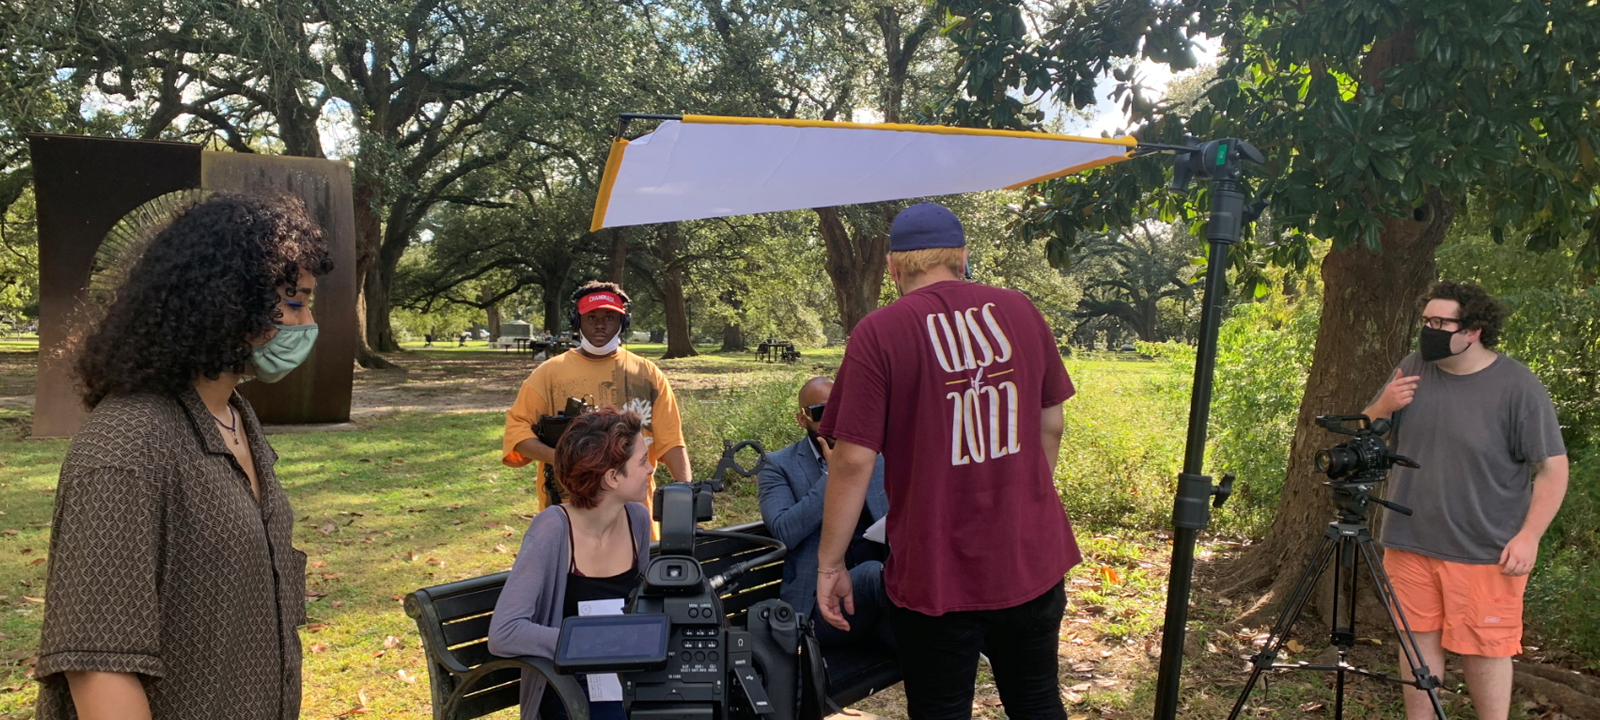 During COVID, Loyola students learned and implemented a subset of SAG and IATSE safety standards and produced films safely with no outbreaks.